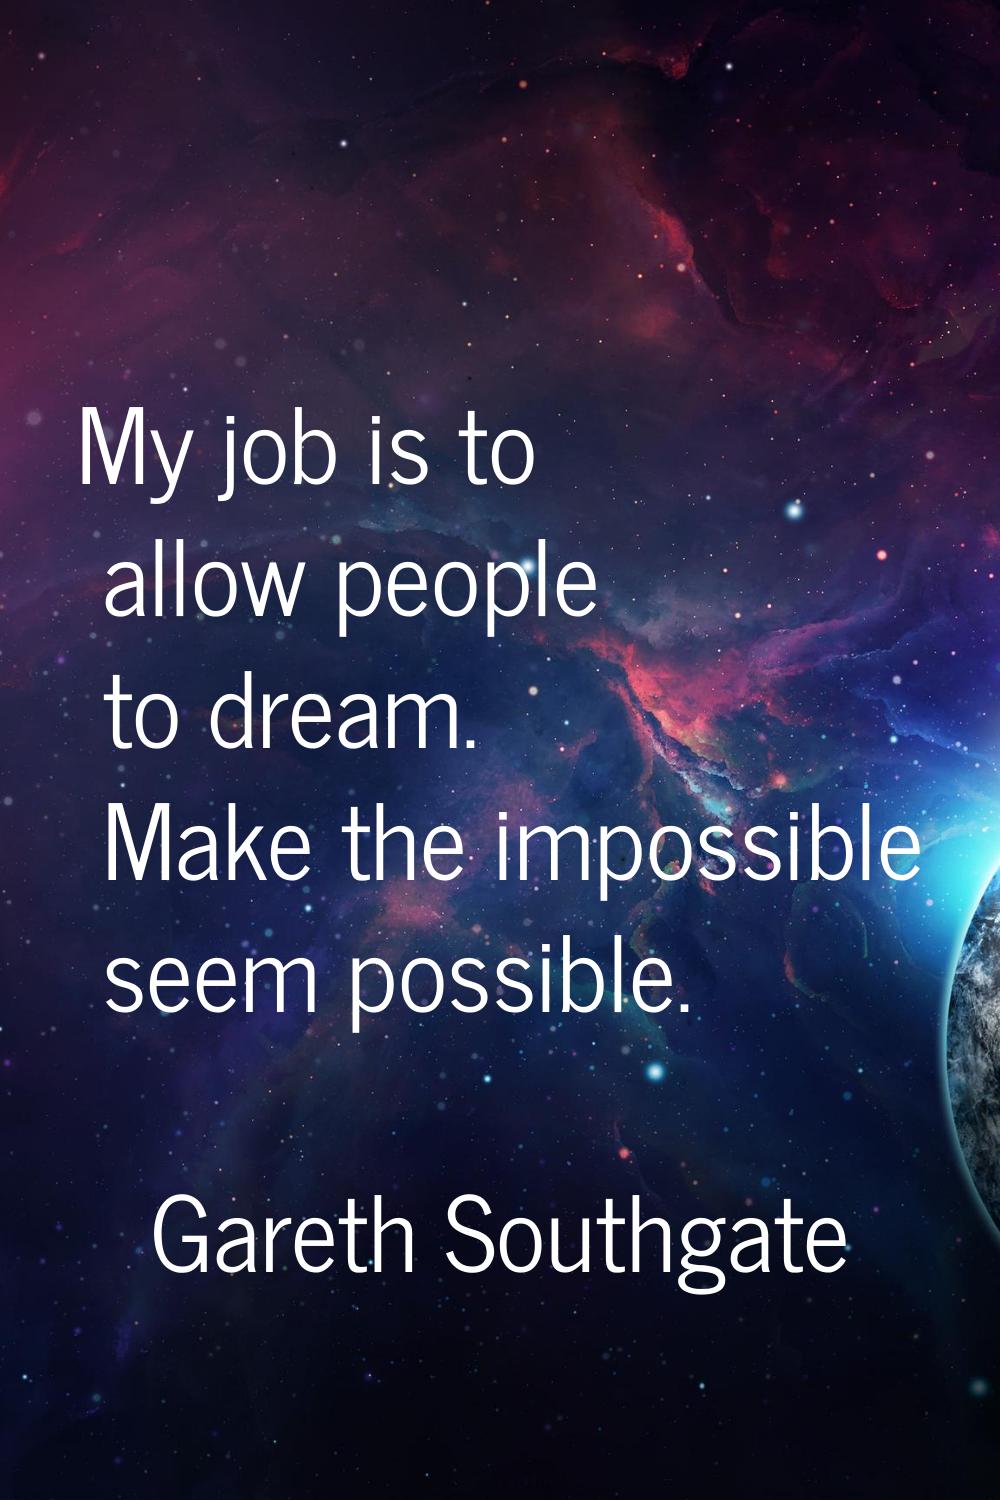 My job is to allow people to dream. Make the impossible seem possible.